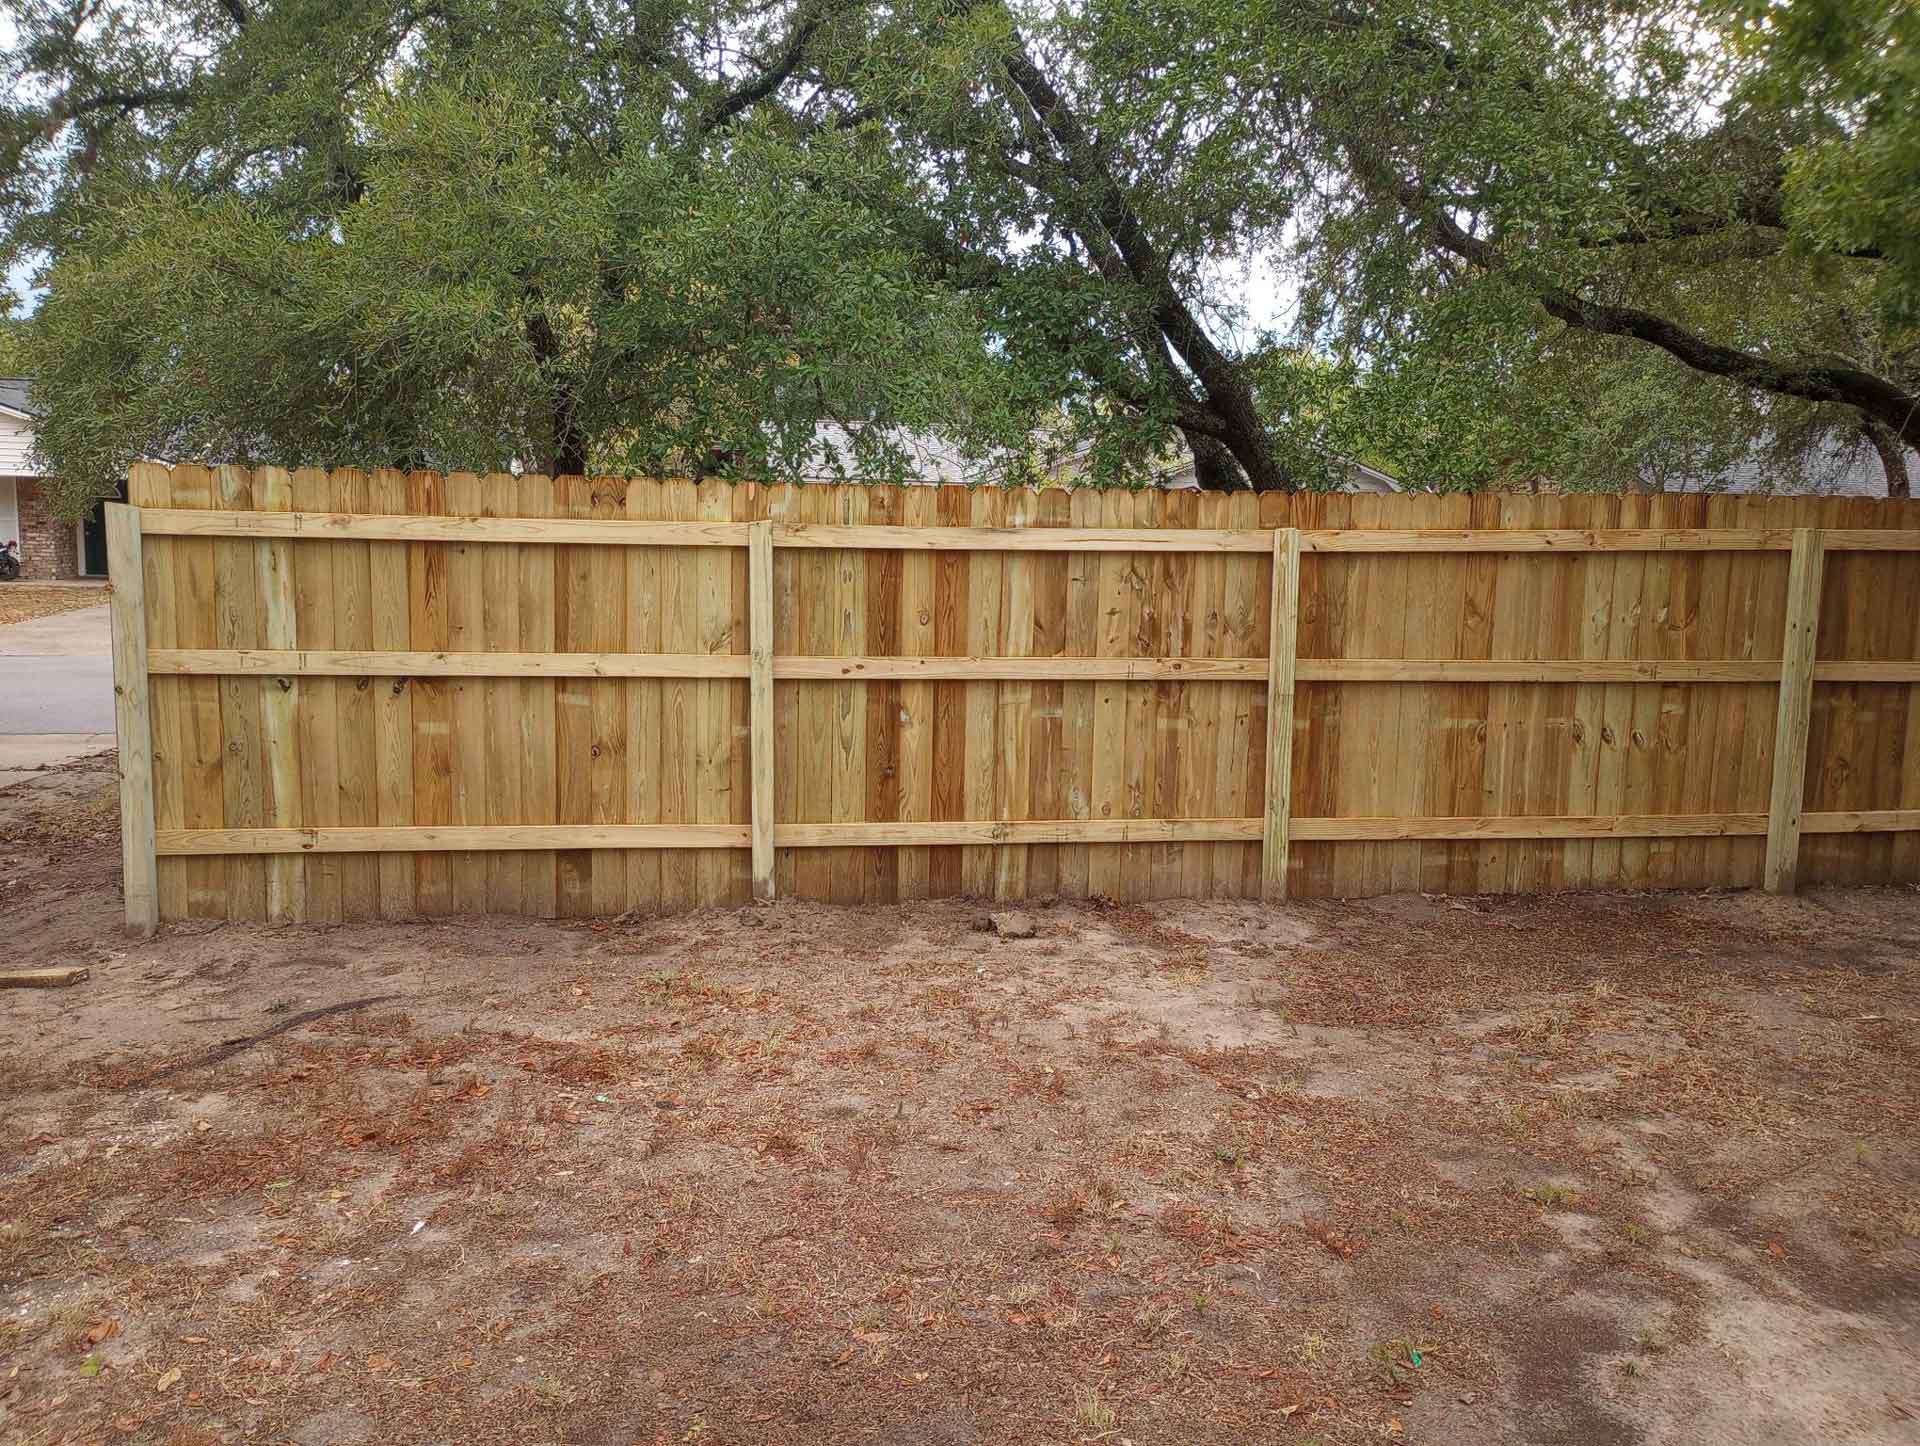 A newly installed wooden backyard fence